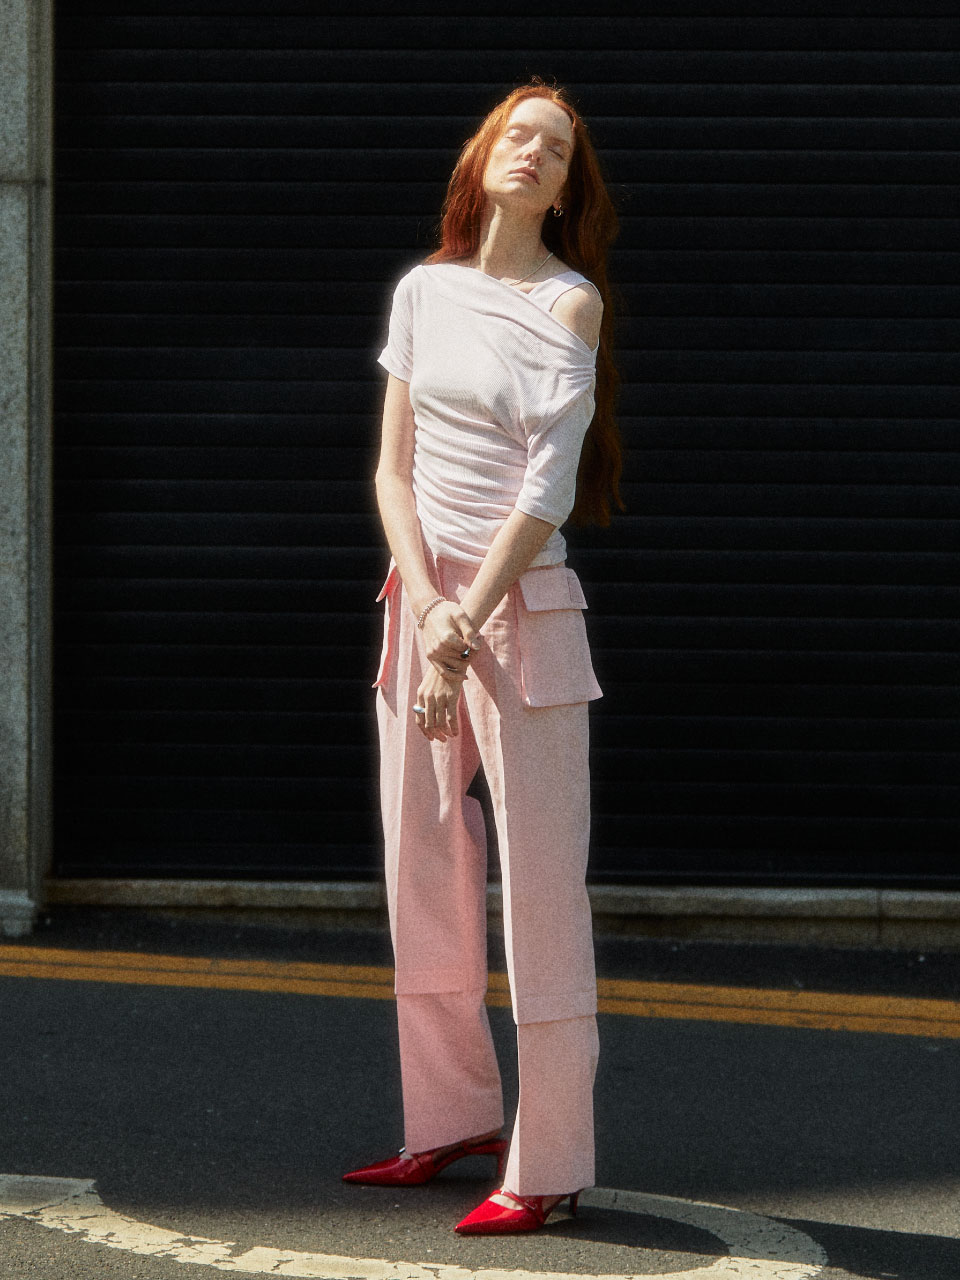 NATION Pocket Embroidery Straight Fit Denim Pants_Pink